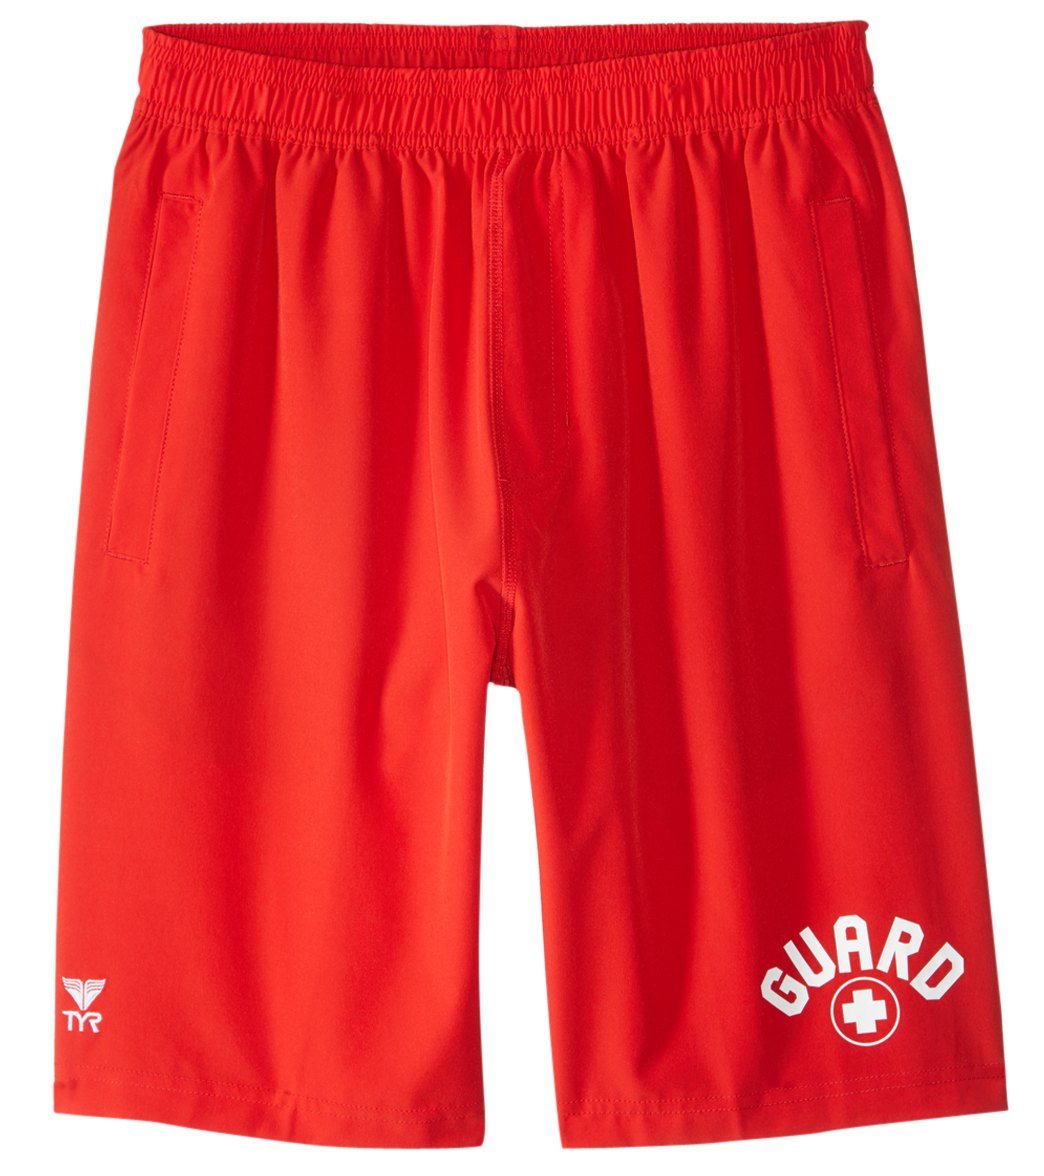 TYR Men's Lifeguard Lake Front Land To Water Short - Red Medium Polyester/Spandex - Swimoutlet.com